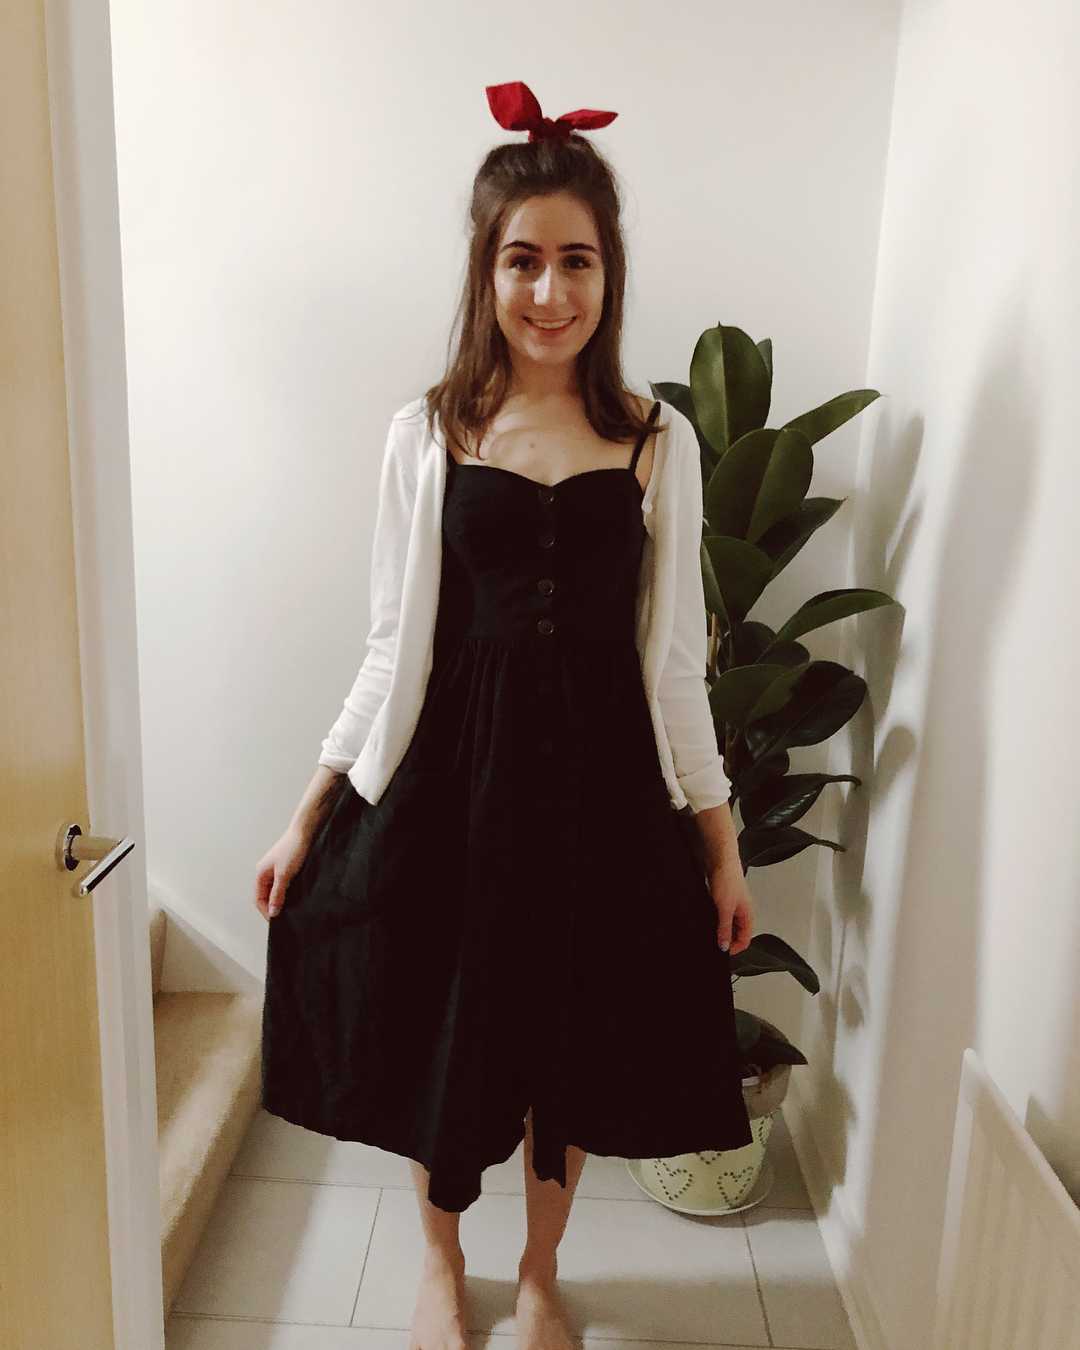 51 Hottest Dodie Big Butt Pictures Demonstrate That She Has Most Sweltering Legs 618